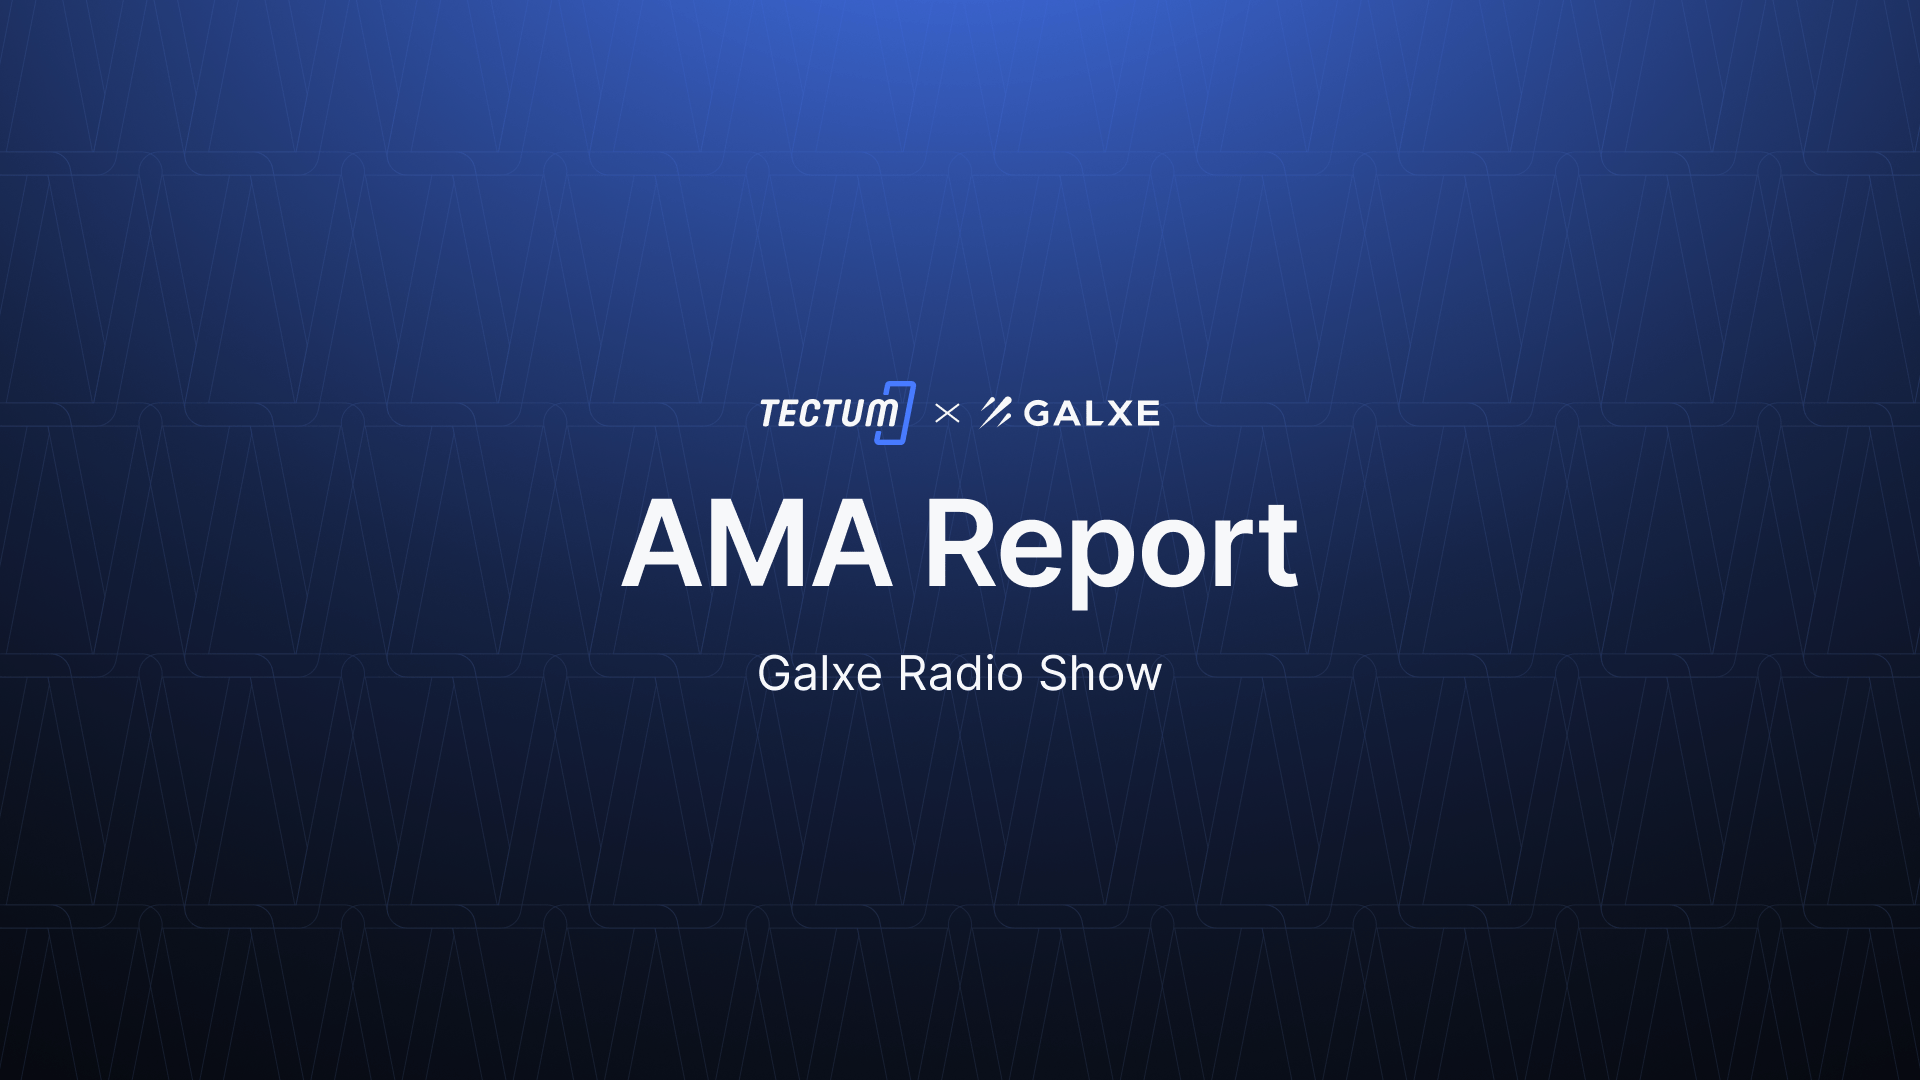 Report of the Tectum AMA Held on the 20th June on Galxe Radio Show